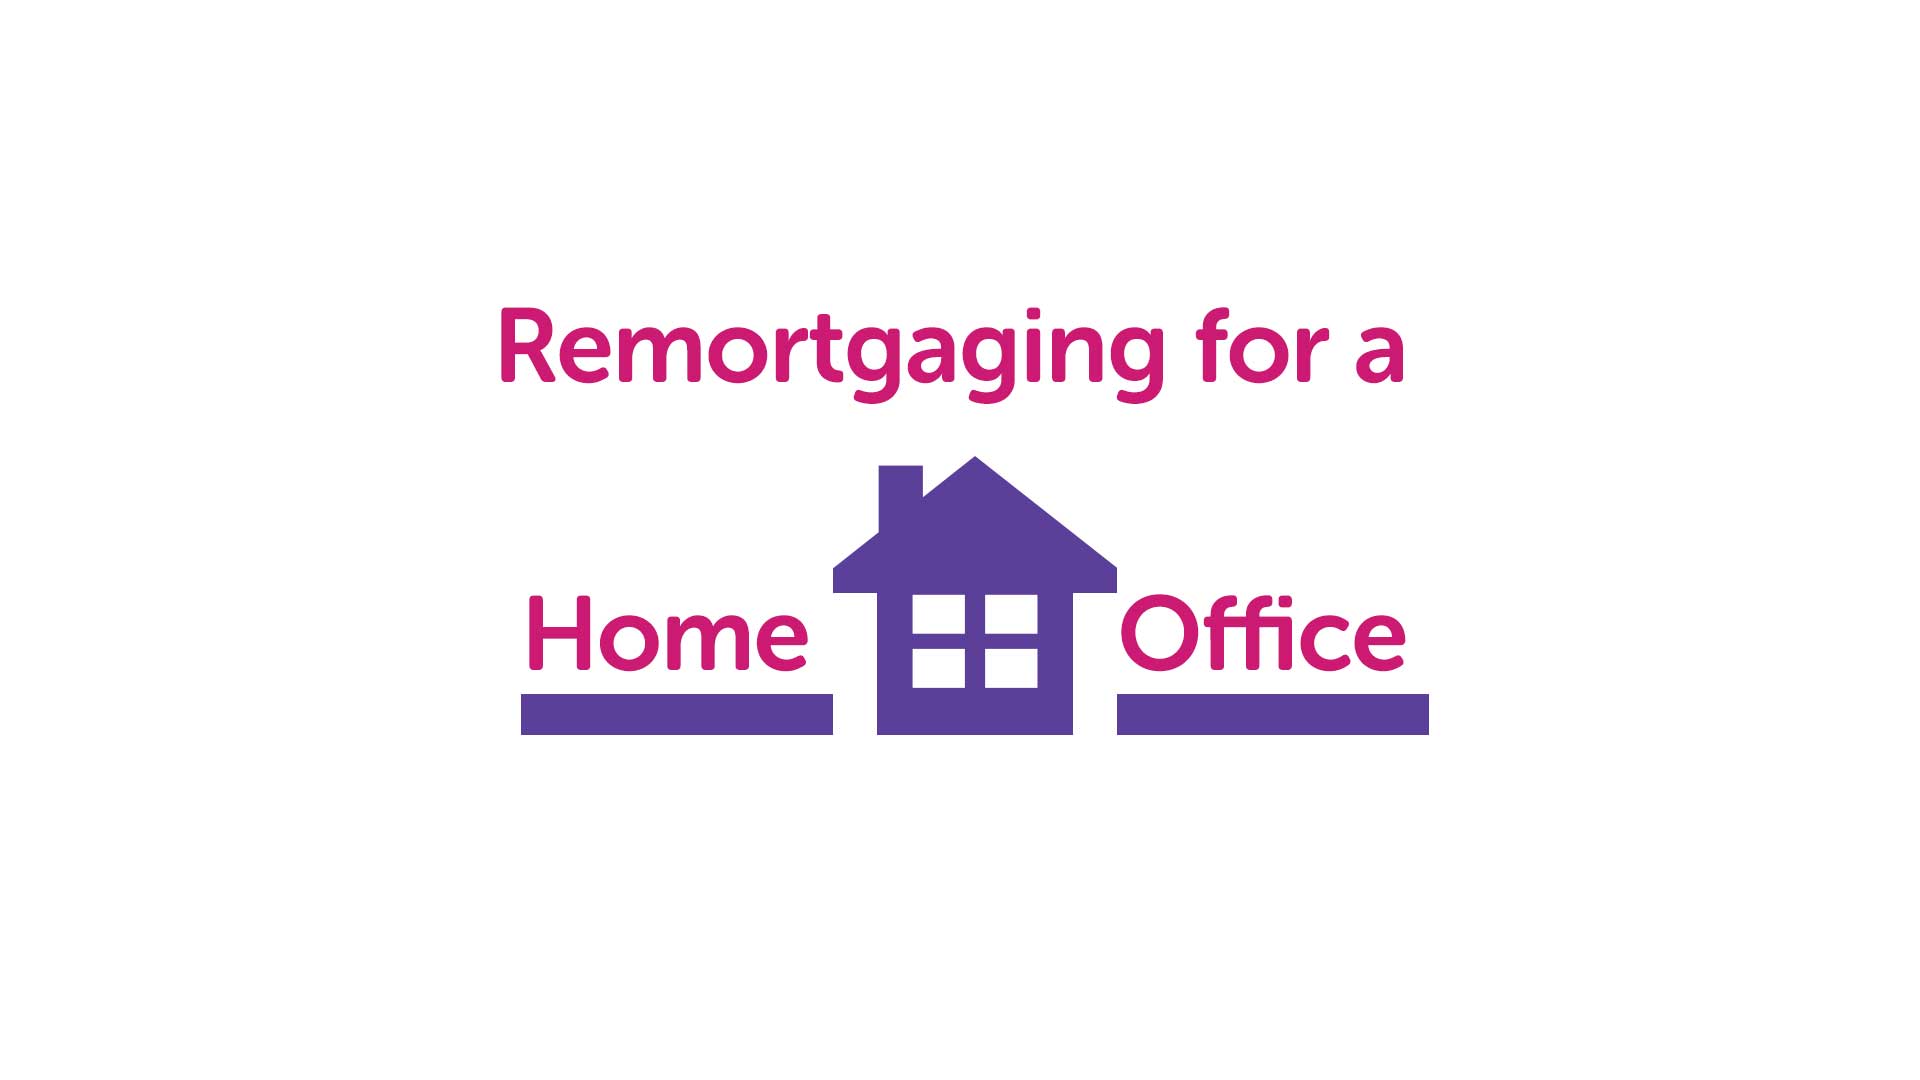 Remortgage for a Home Office in Nottingham